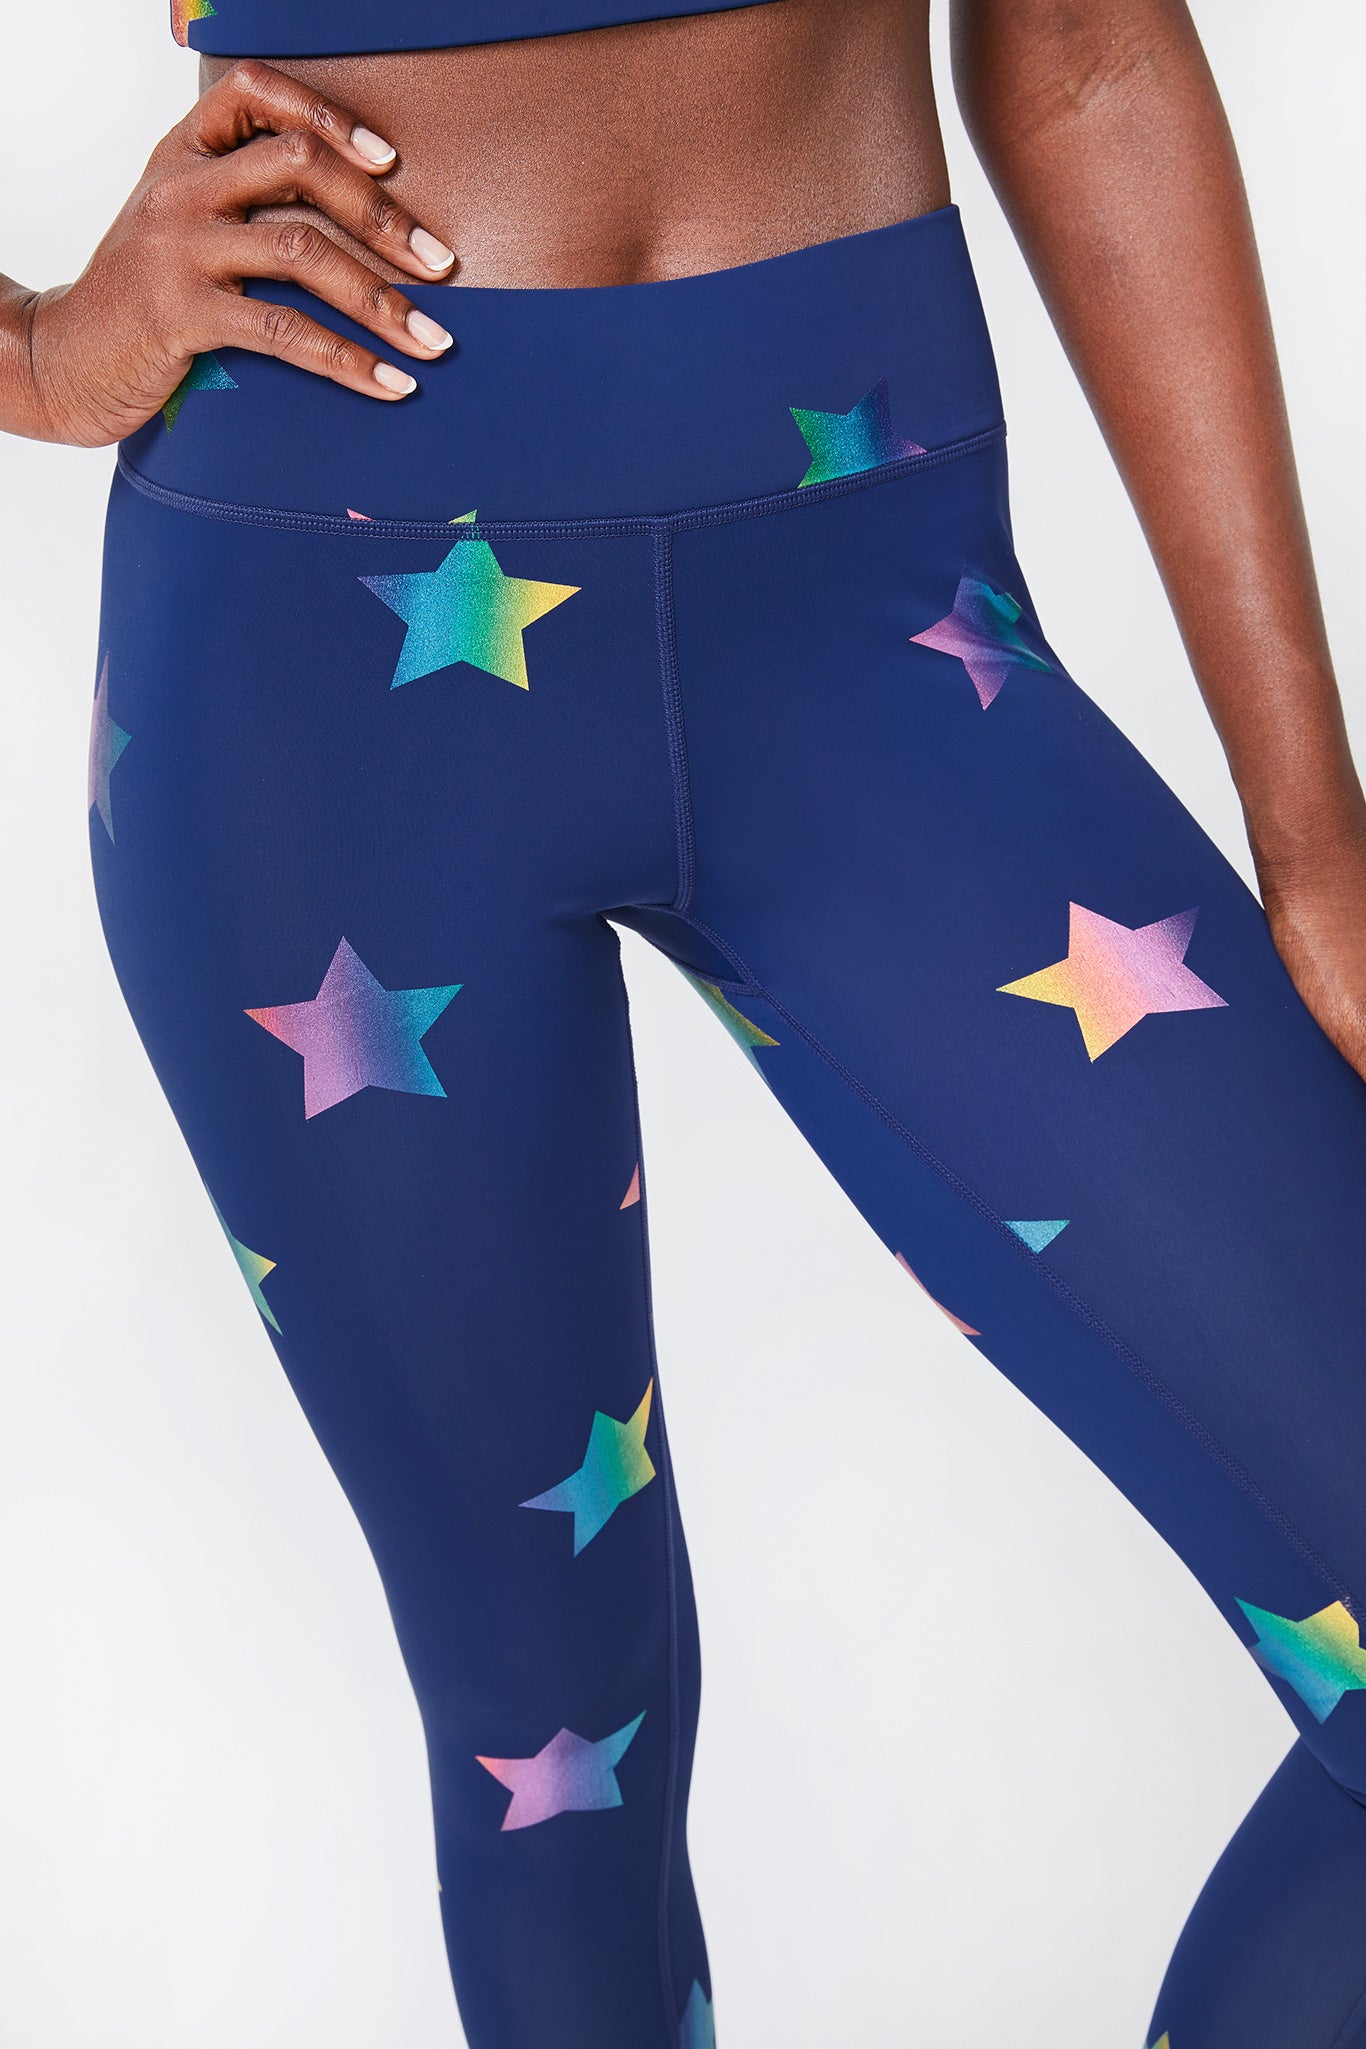 UpLift Leggings in with – Star Tall Band Foil Navy Rainbow